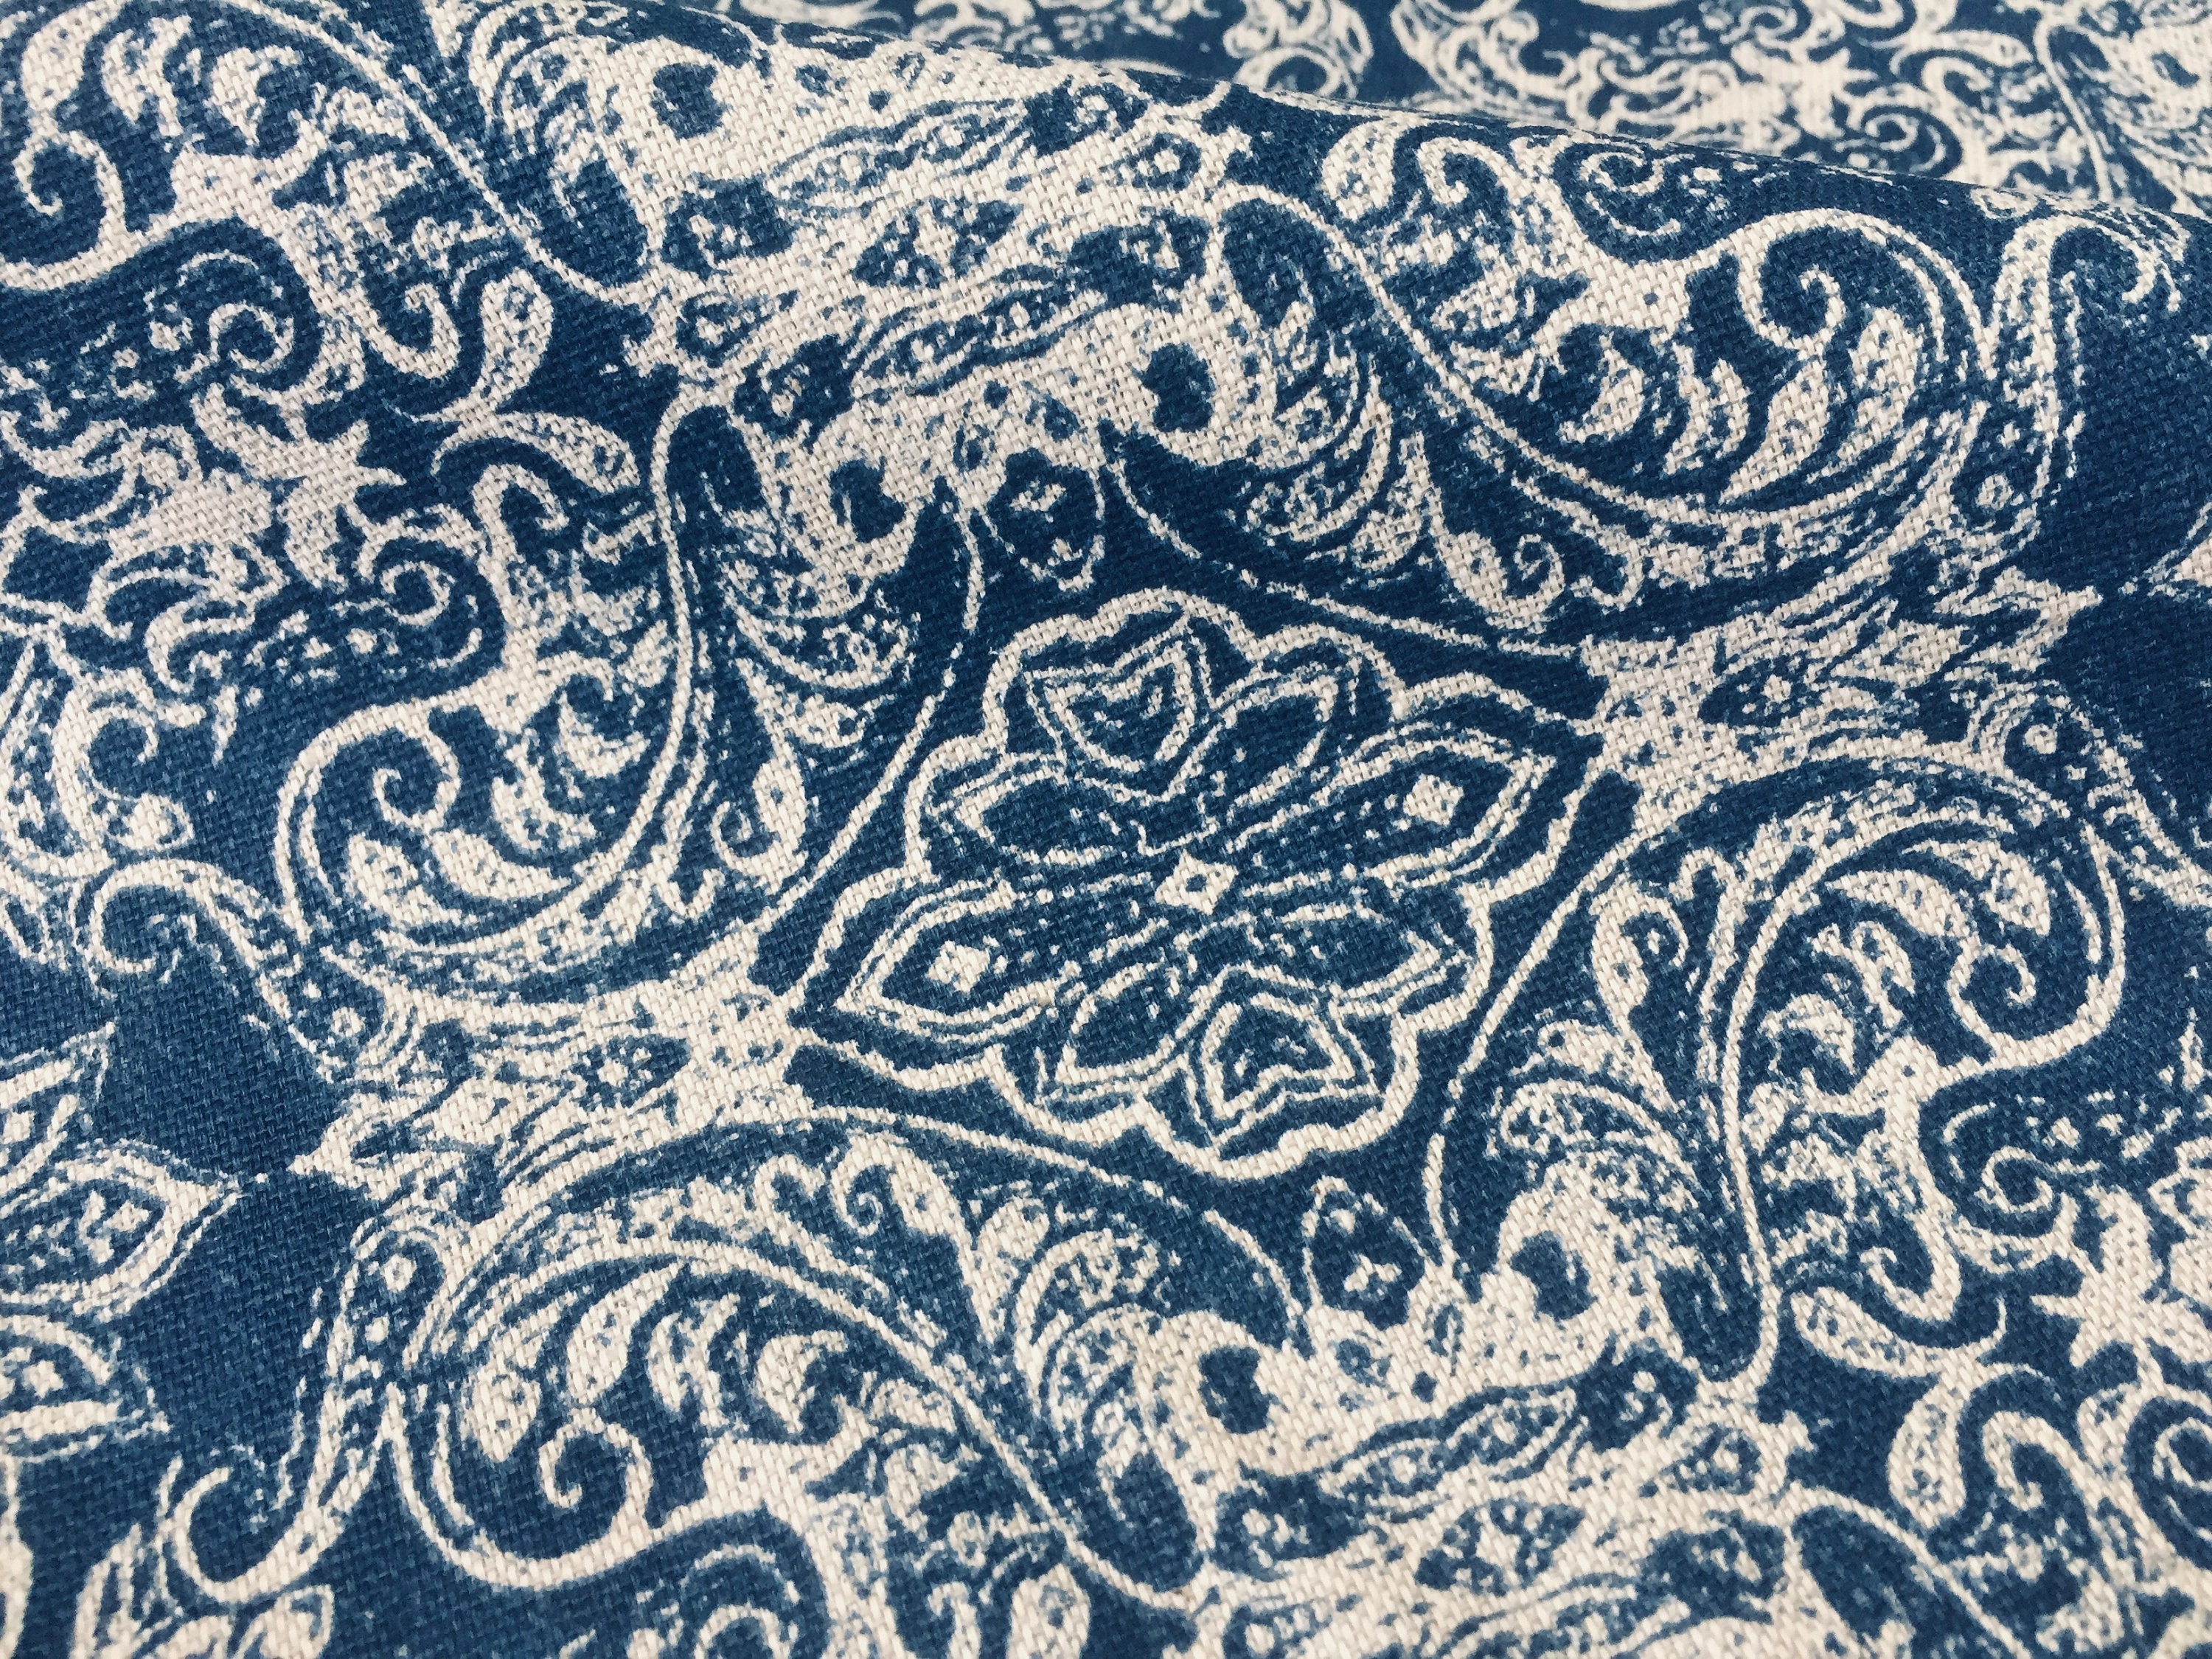 Buy JACQUARD Baroque Vintage Fabric Material in India - Etsy